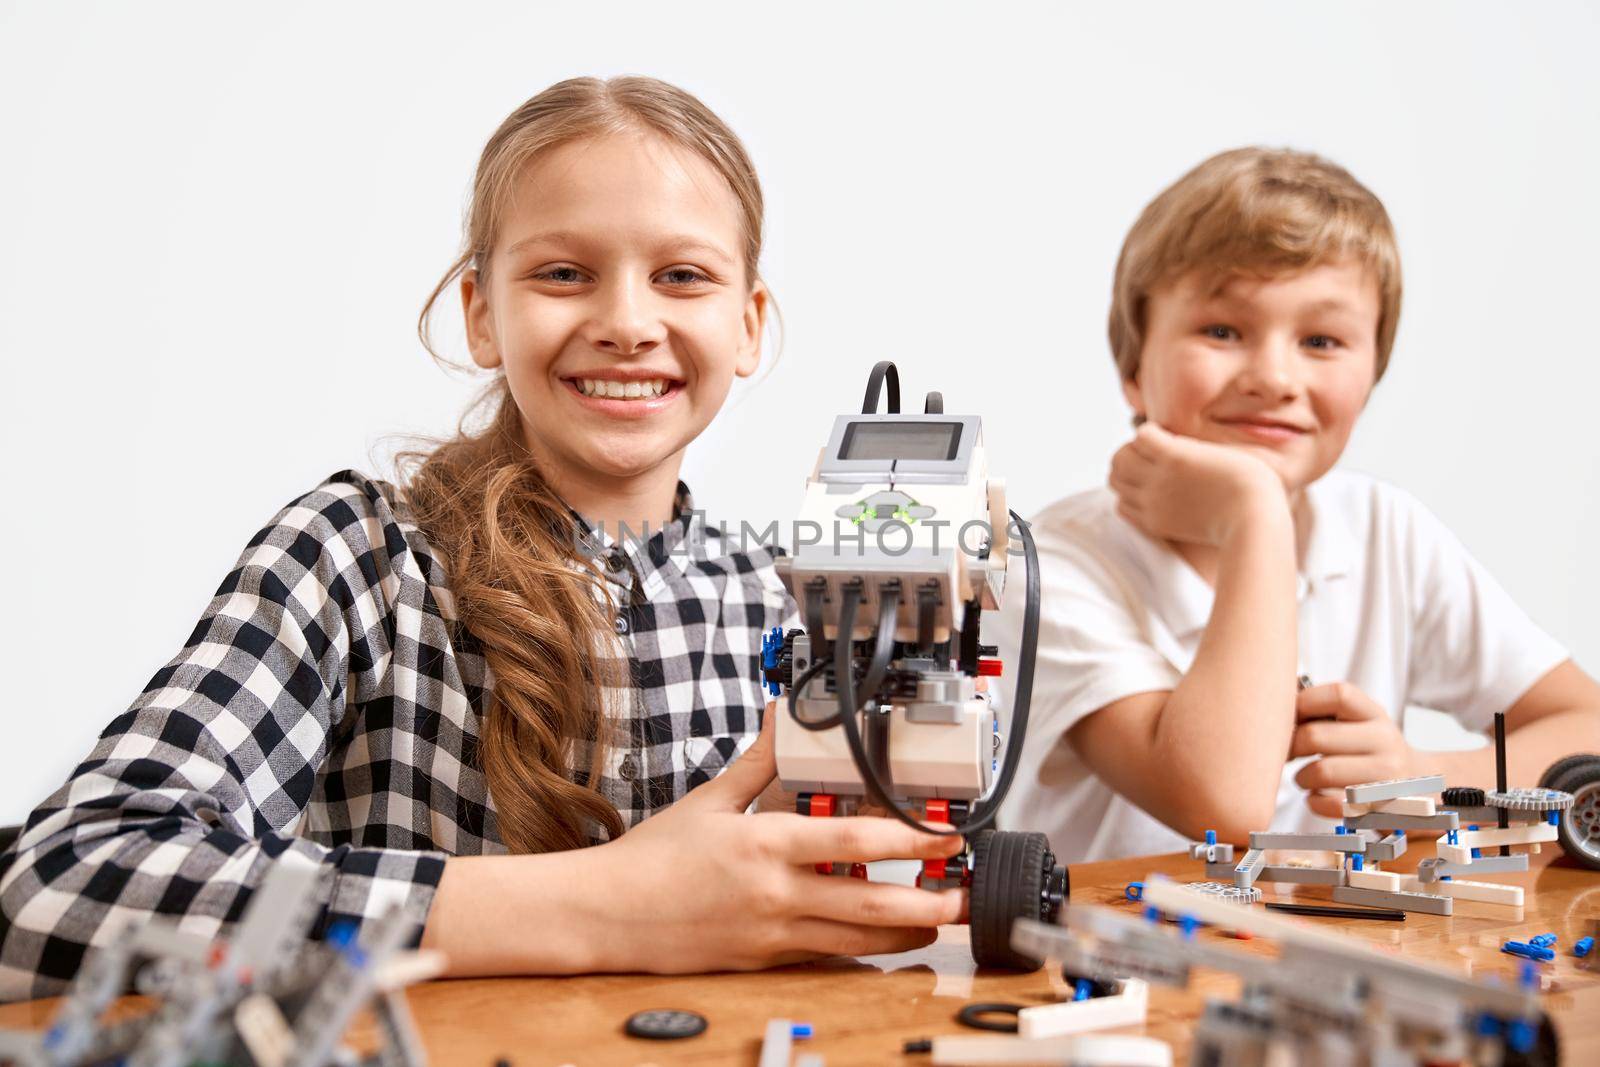 Front view of boy and girl creating robot using building kit for kids on table. Nice interested friends smiling, lookig at camera and working on project together. Concept of science engineering.